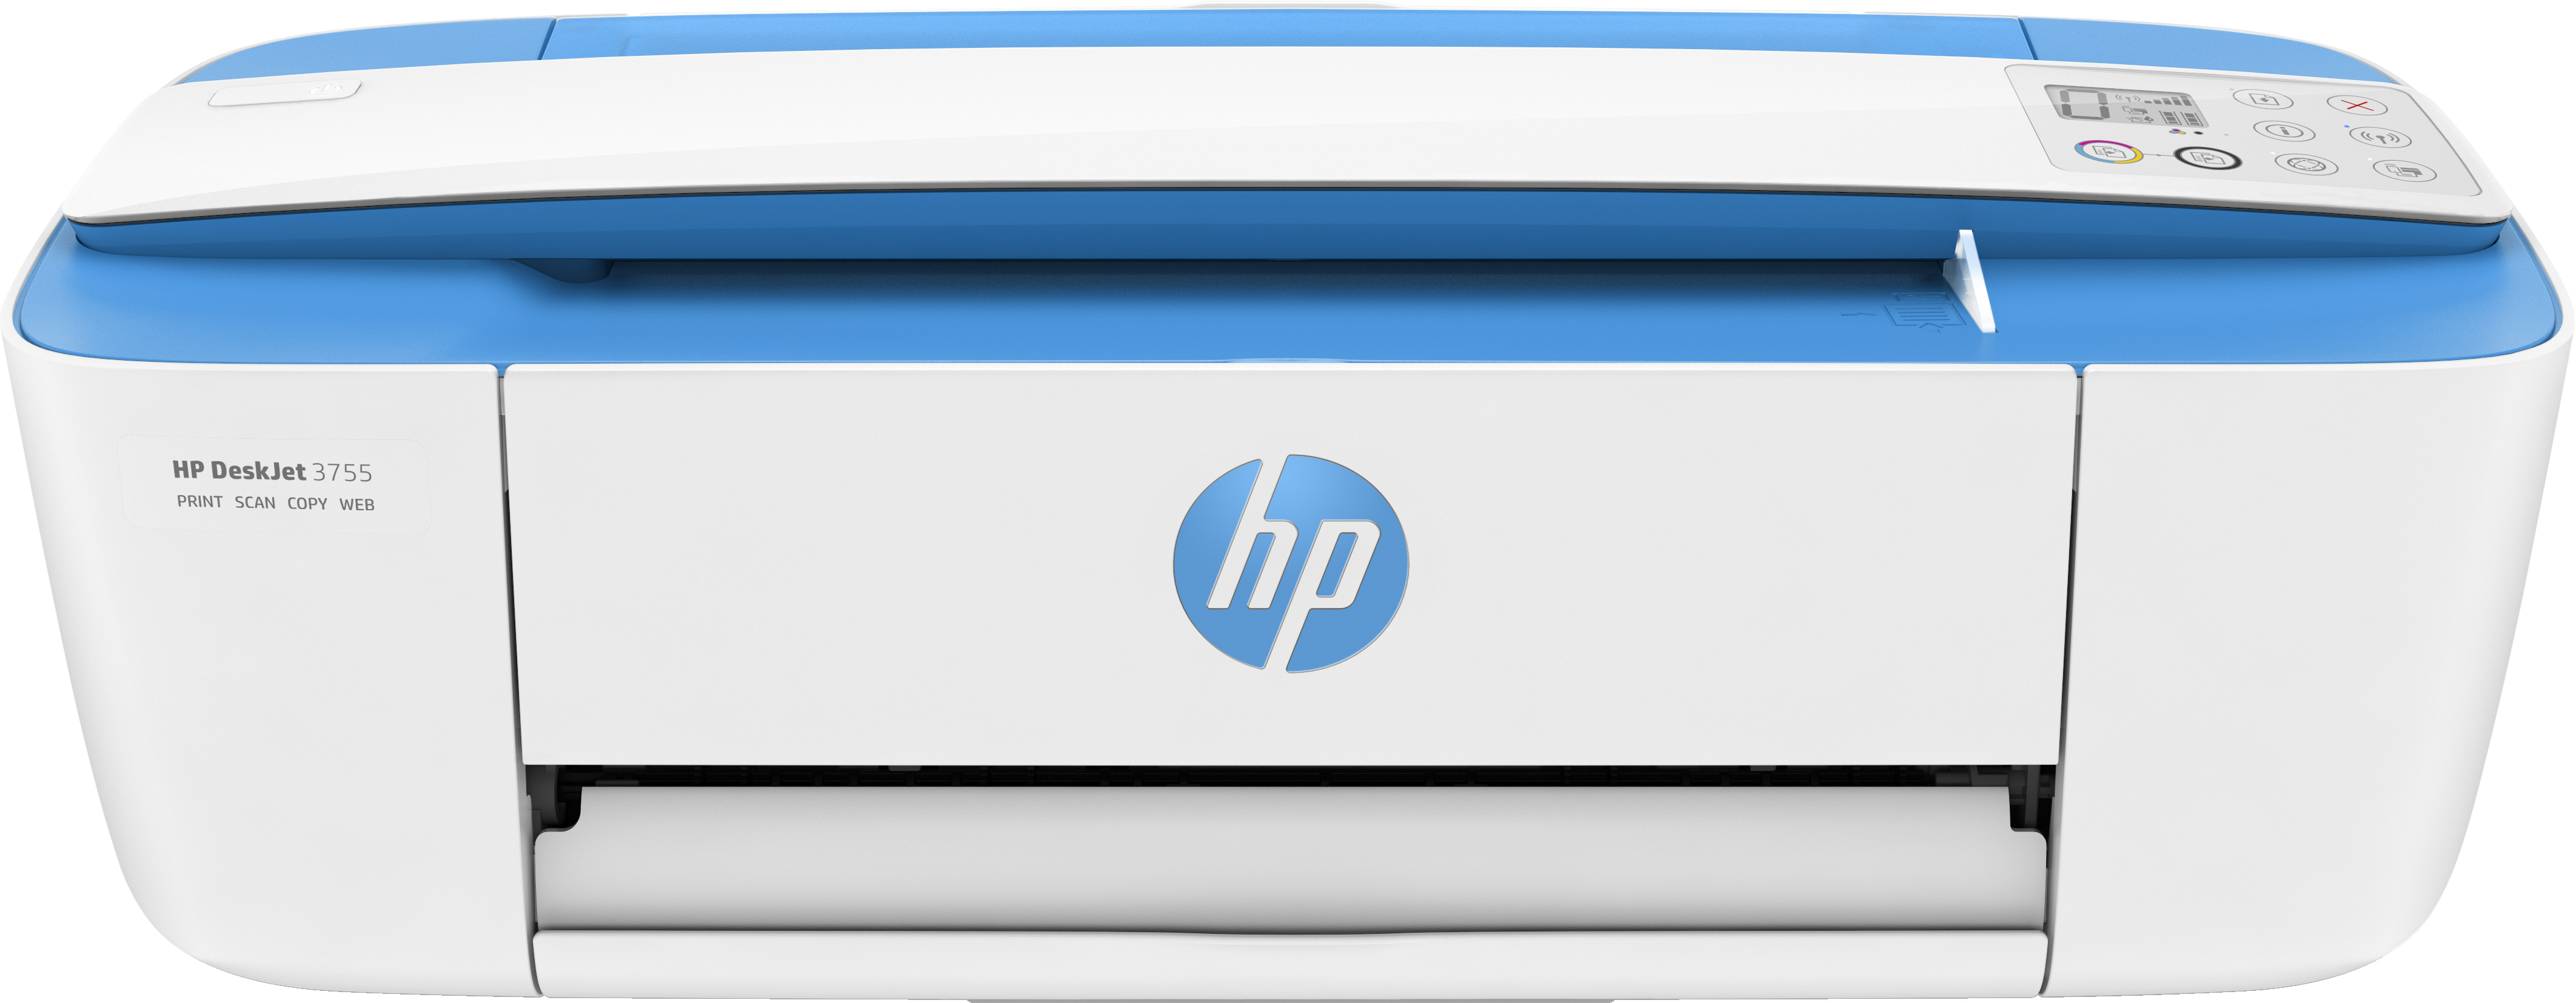 HP DeskJet 3762 All-in-One Printer A jet d'encre thermique A4 4800 x 1200 DPI 8 ppm Wifi